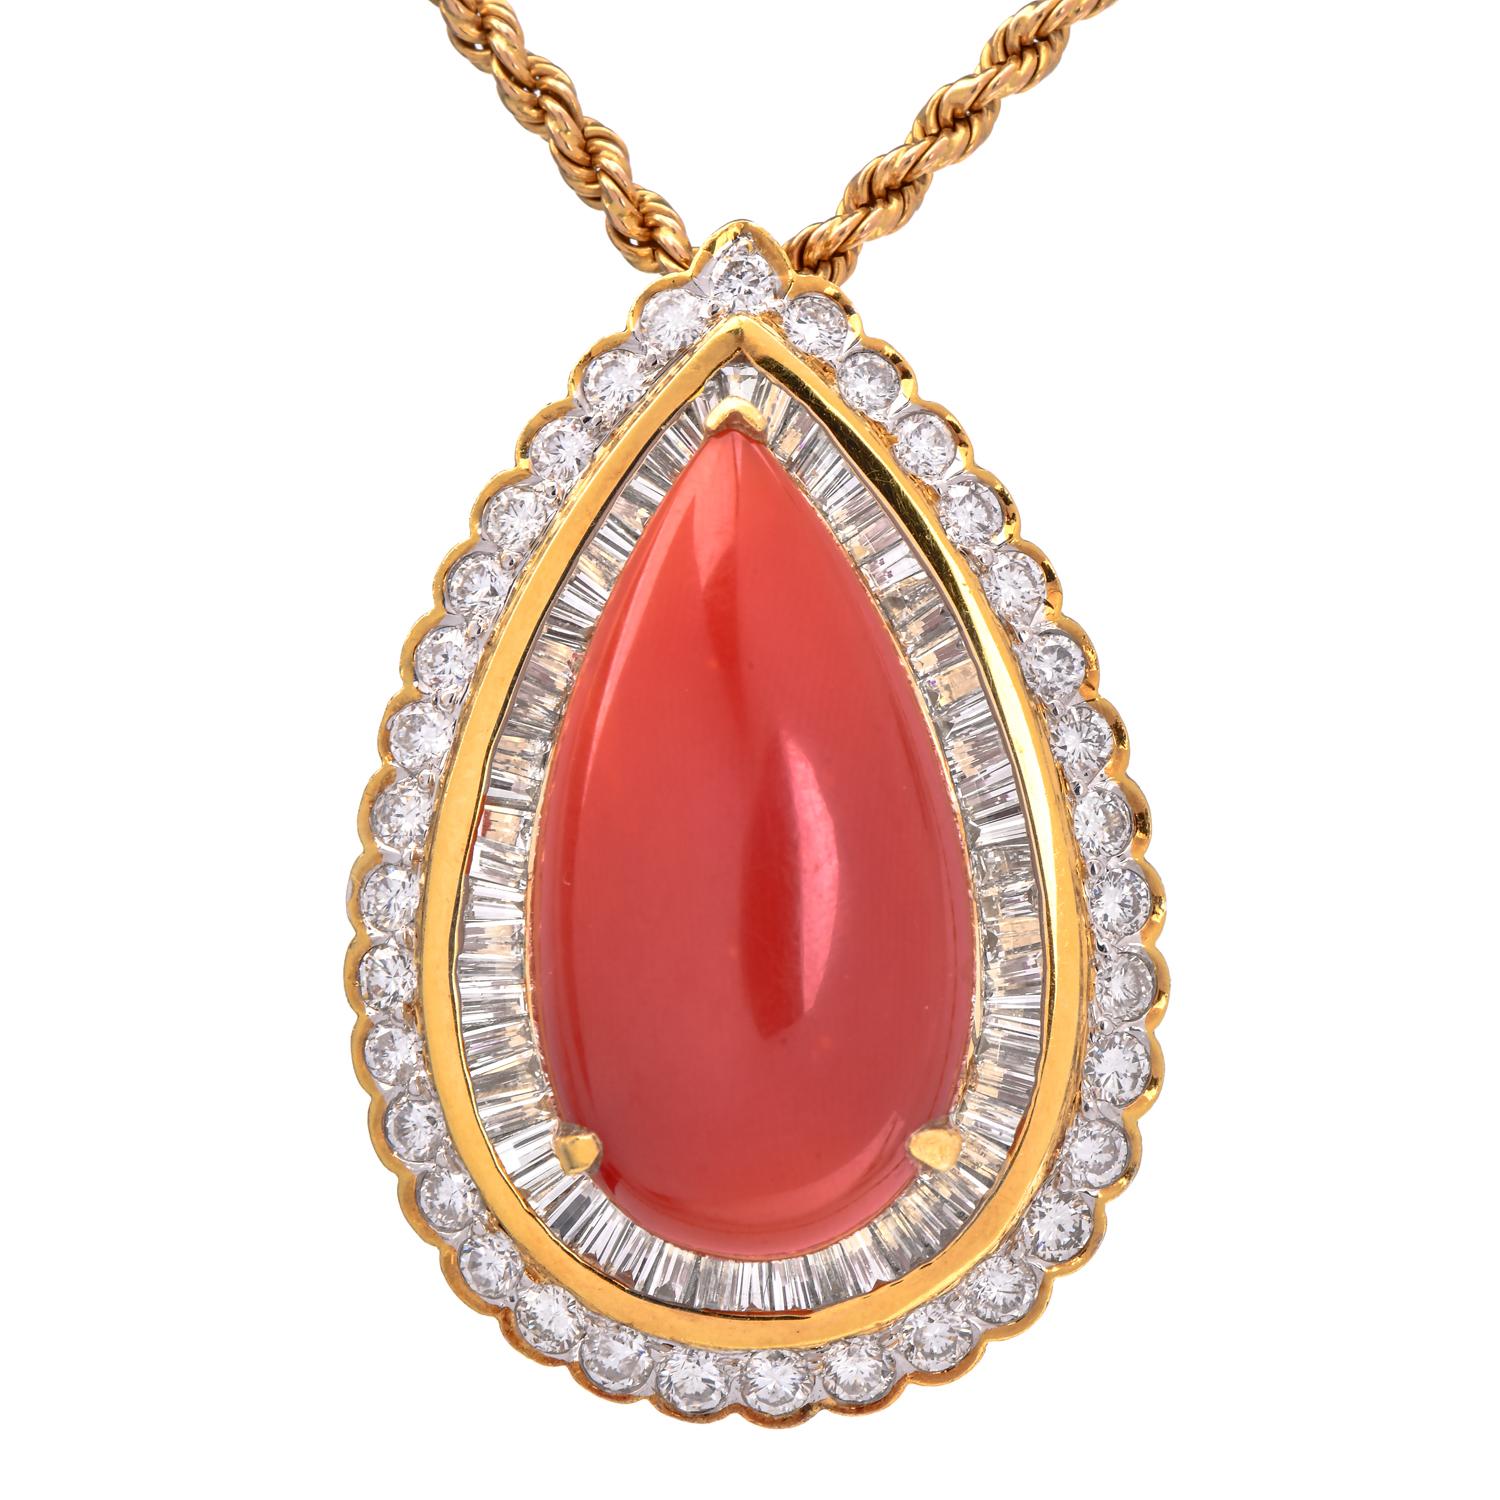 Stunning 18K Yellow Gold Pear Halo Design Pendant with GIA certified Red Coral surrounded with Natural Brilliant Round and Tapered Baguette Diamonds with great brilliance.

The open work design at the back elevates the overall look of the